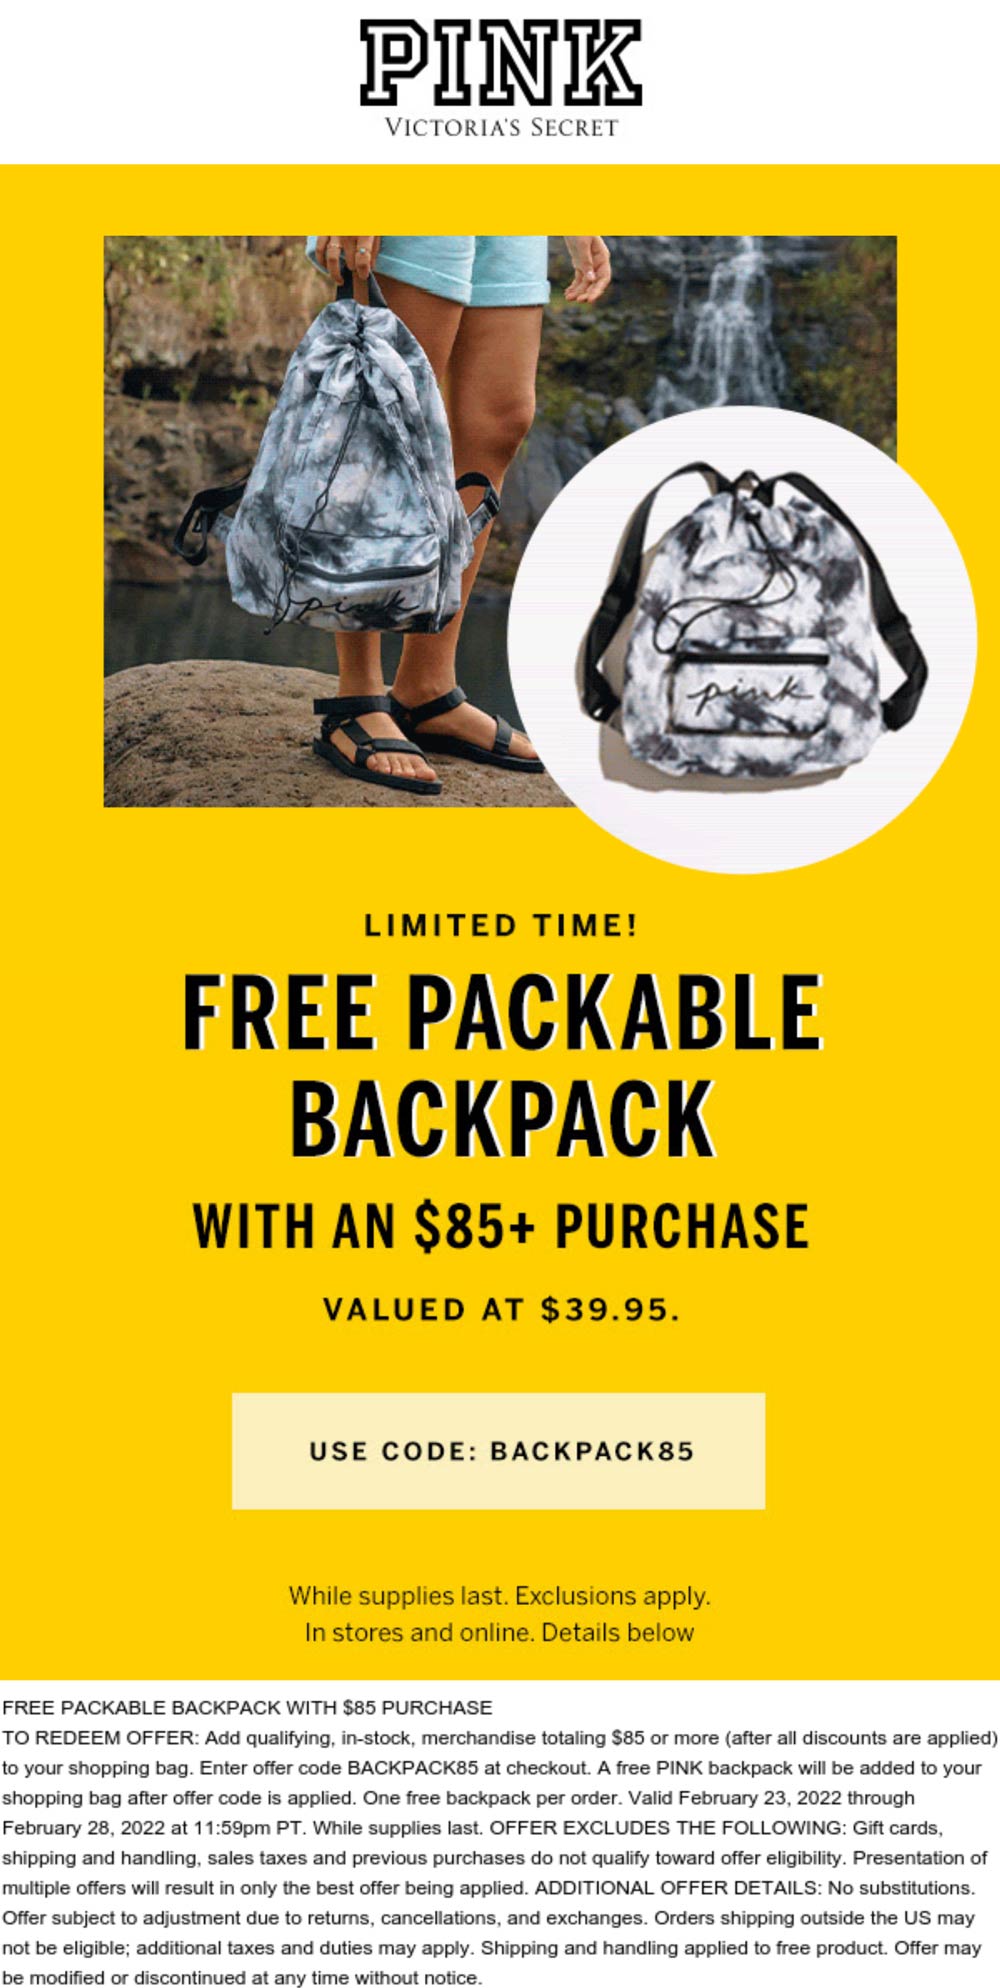 PINK stores Coupon  Free backpack on $85 spent at PINK via promo code BACKPACK85 #pink 